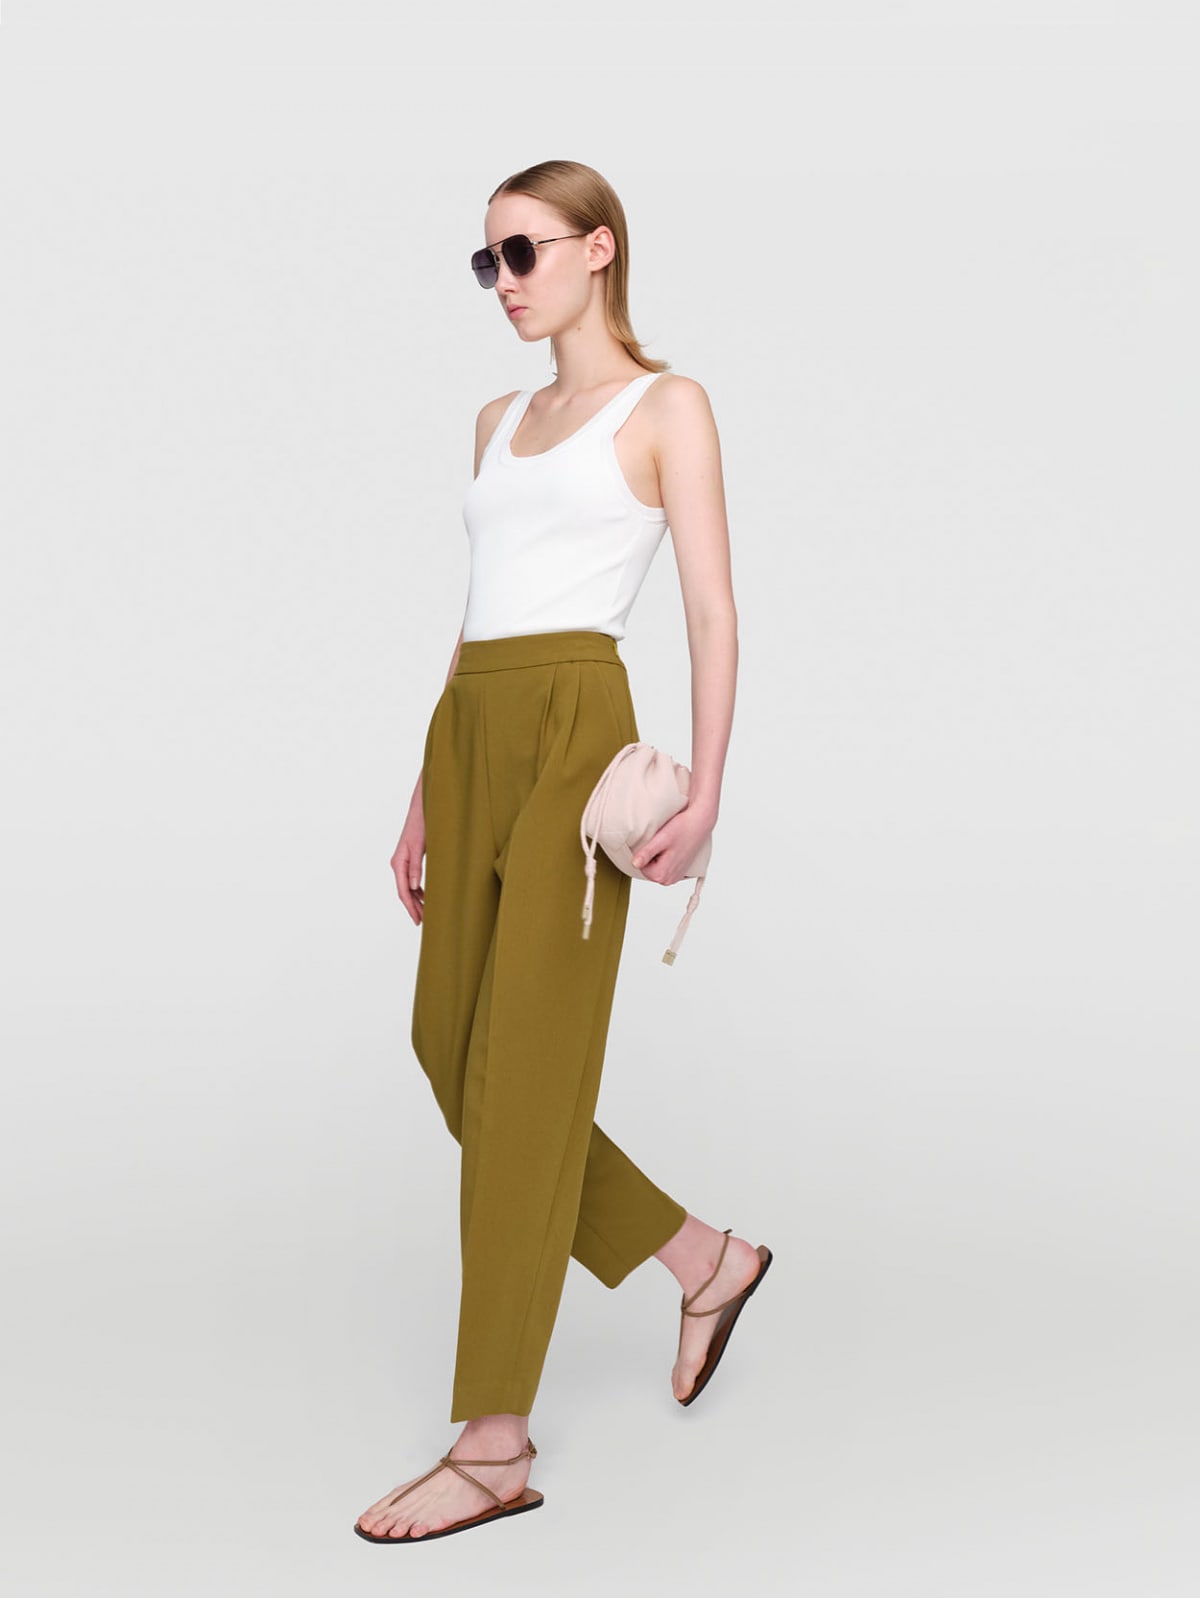 Summer Suiting  Pippa  Crop Pants  5